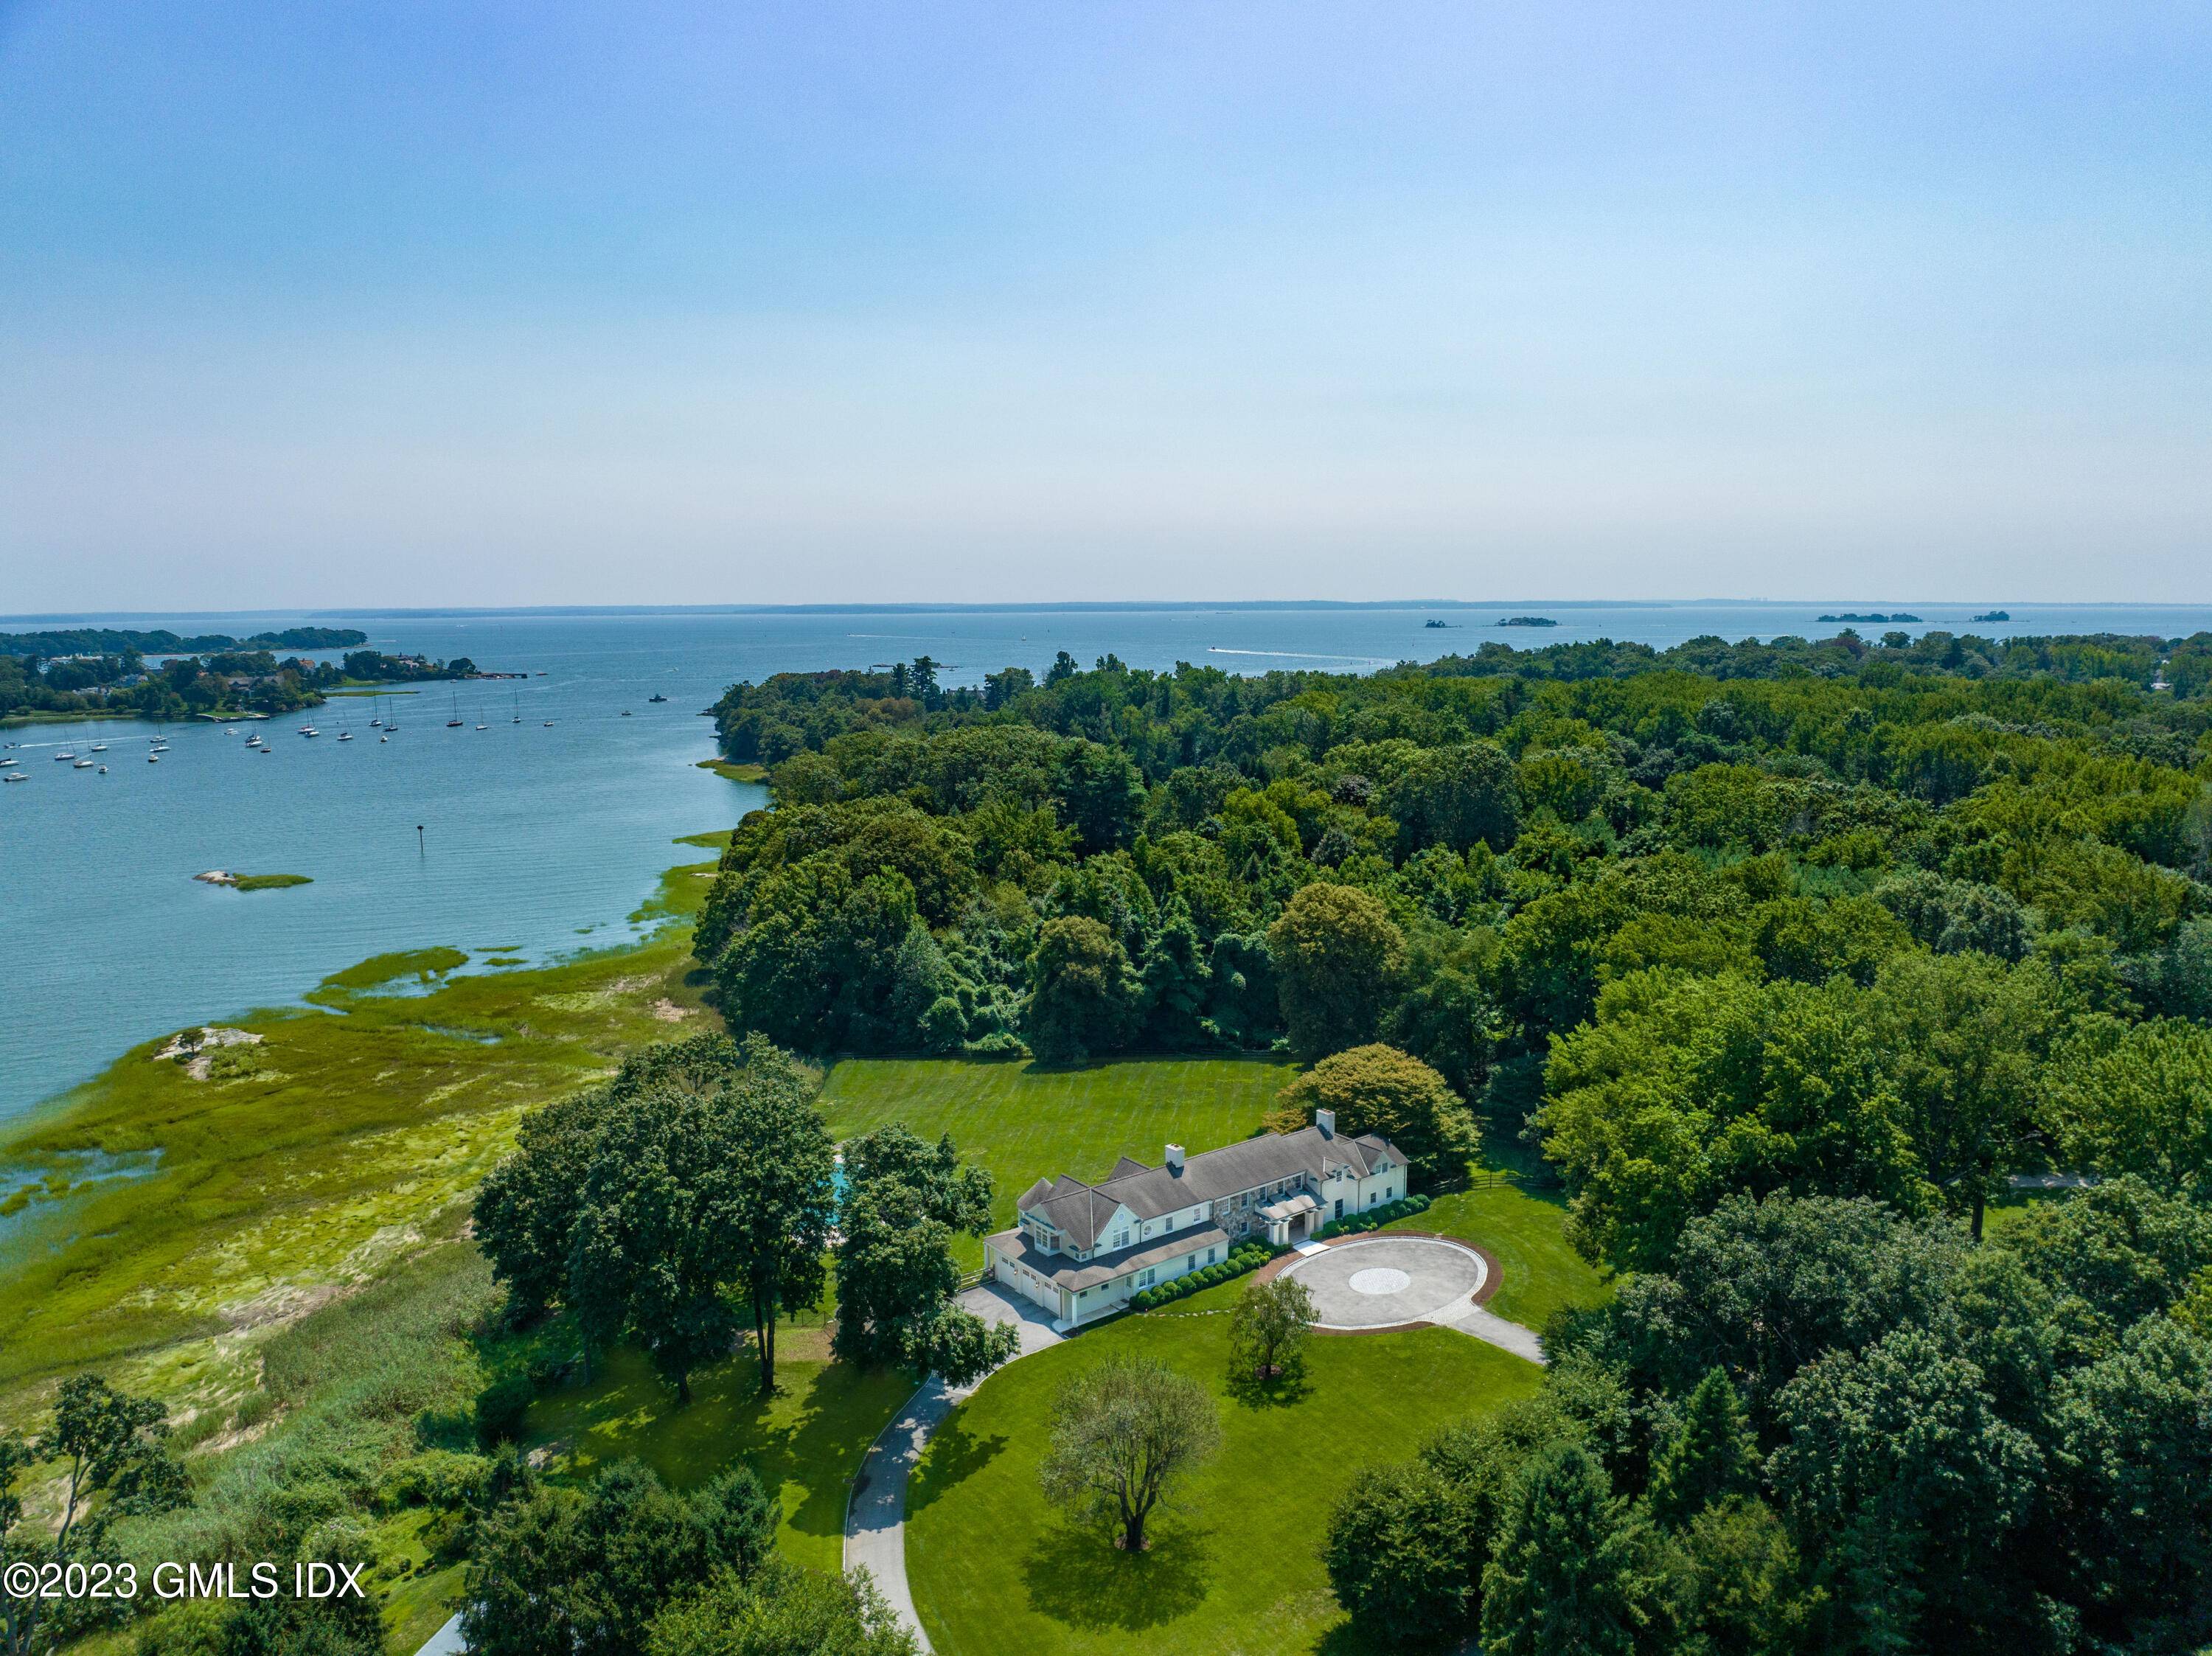 This truly magnificent 10 acre waterfront compound on Long Island Sound has a remarkably private setting with 440' of direct water frontage.